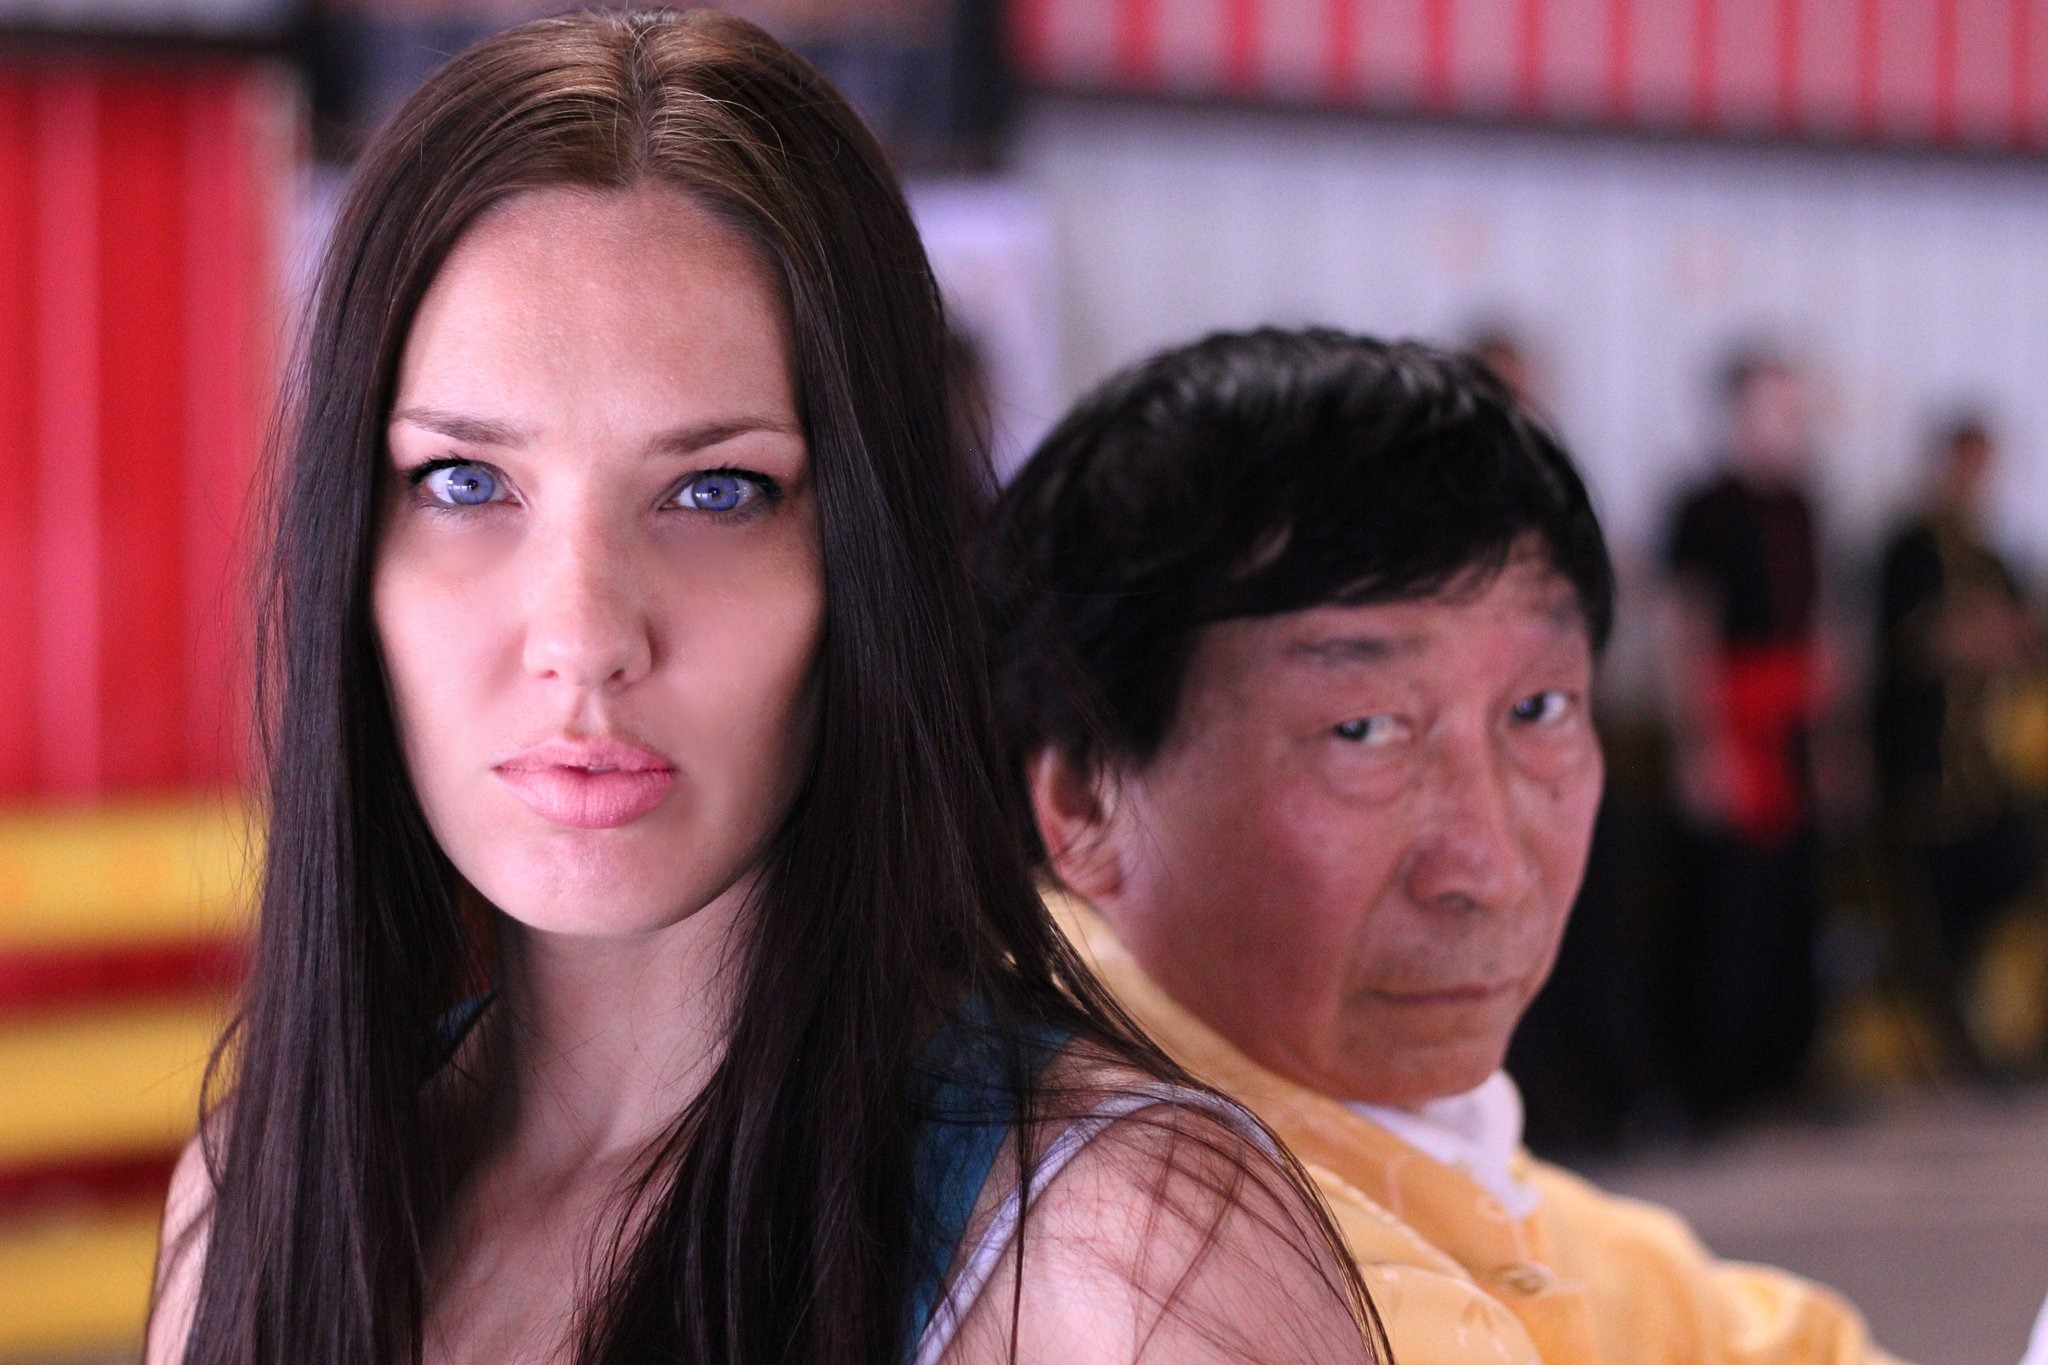 Promo shot for upcoming martial arts film Warriors Clan with Chiu Chi Ling from Kung Fu Hustle.